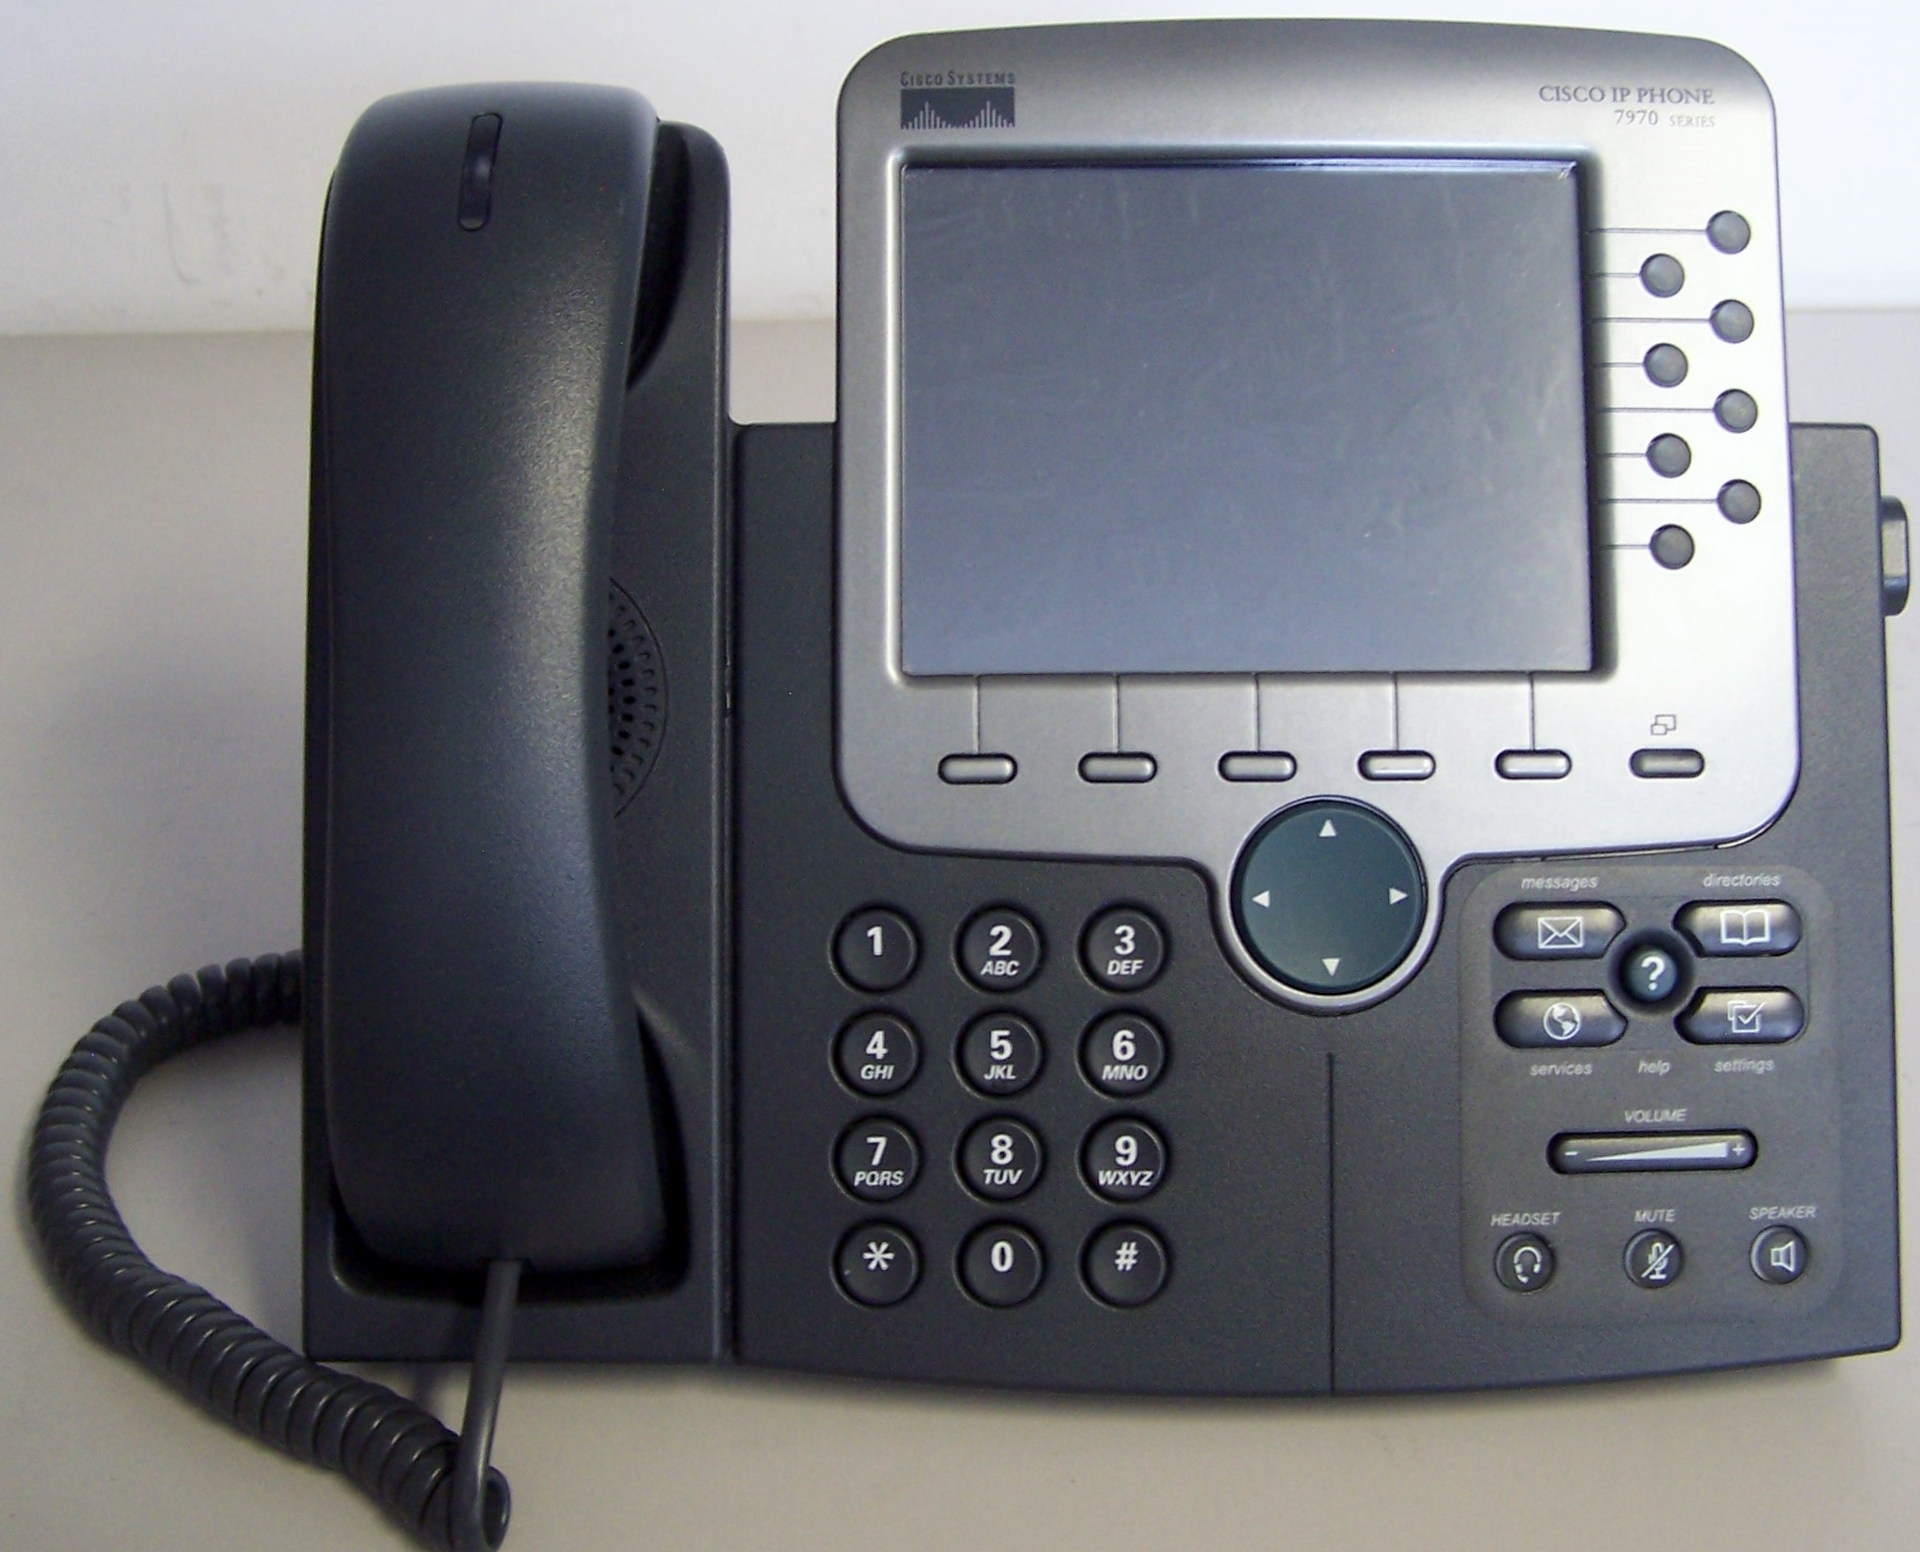 1 YEAR WARRANTY Details about   CISCO 7970G CISCO CP-7970G  Six line Color Display IP Phone 